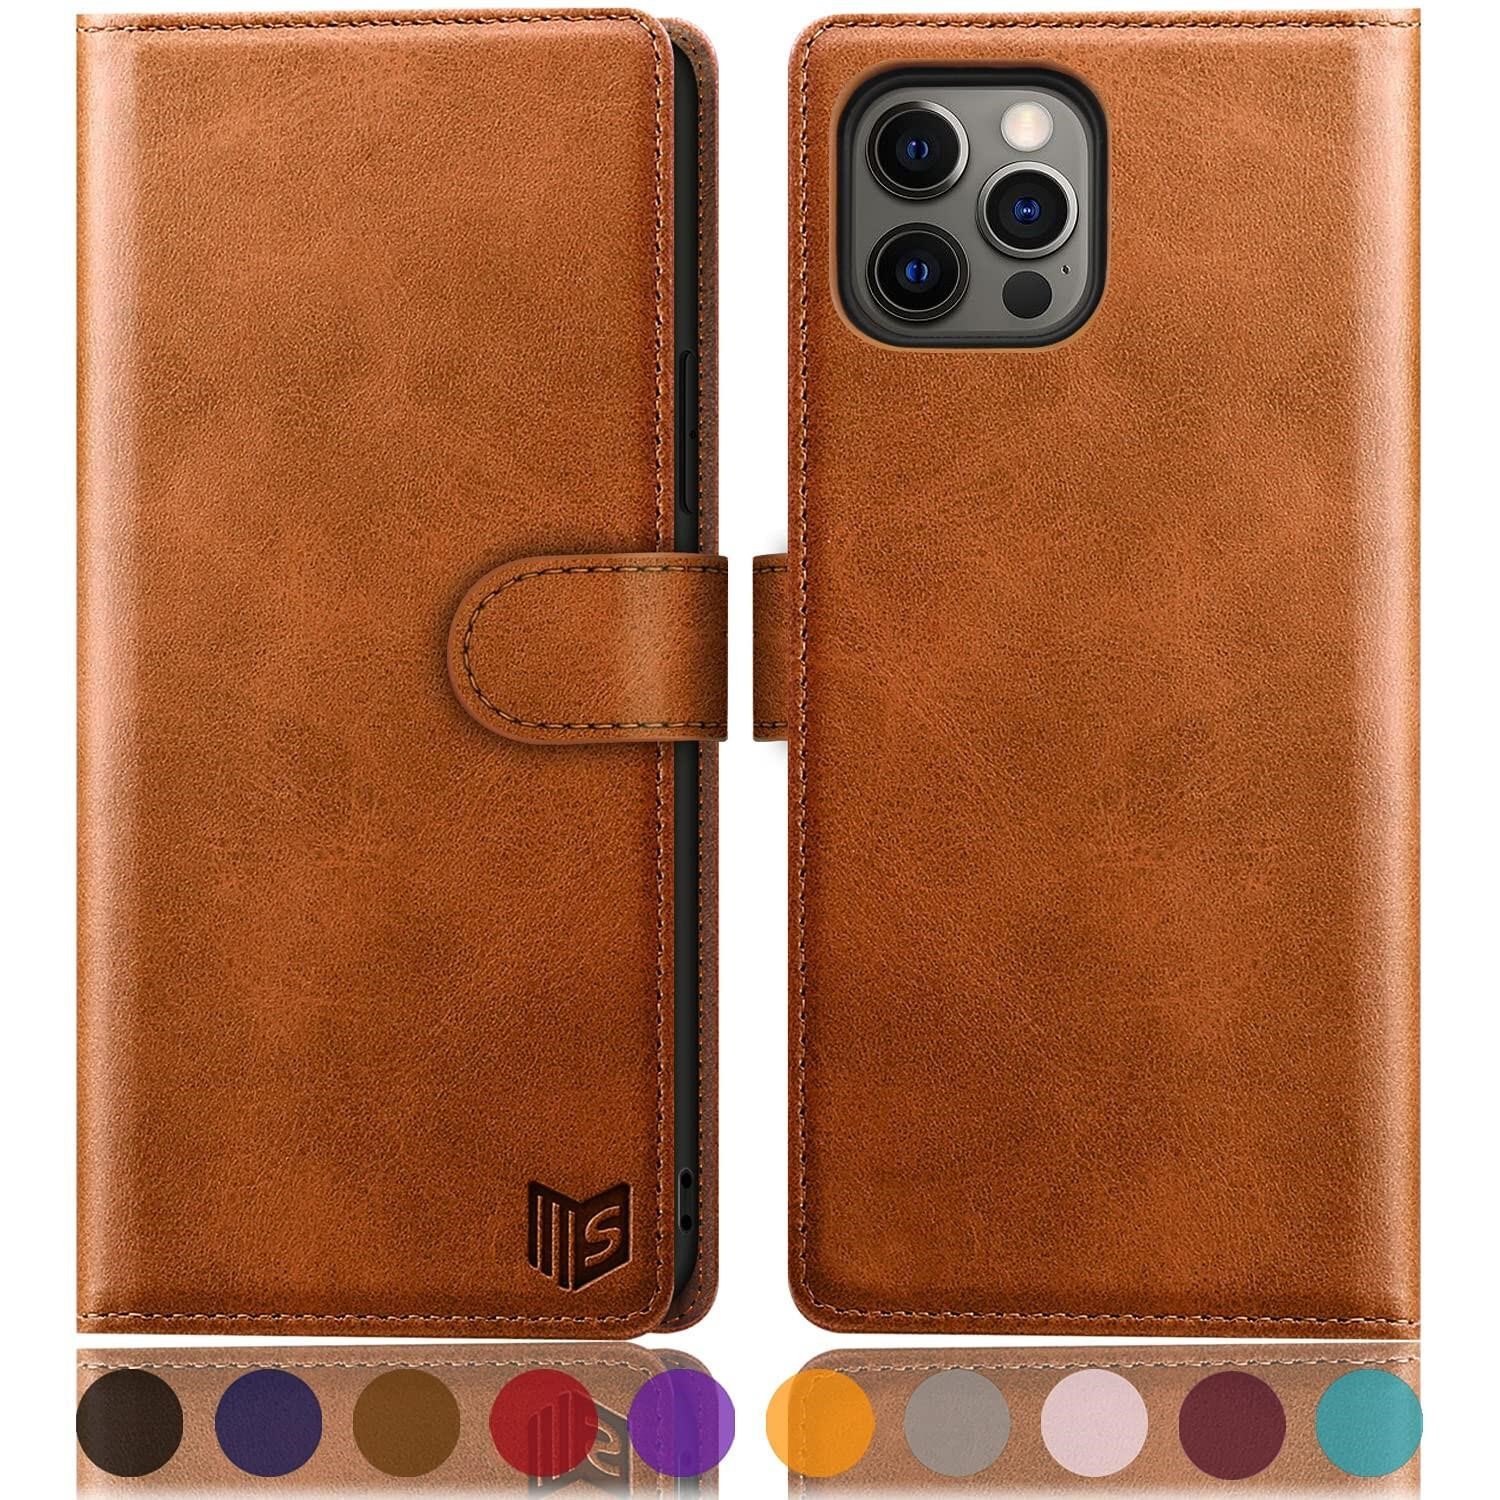 SUANPOT for iPhone 12 Pro Max Leather Wallet case